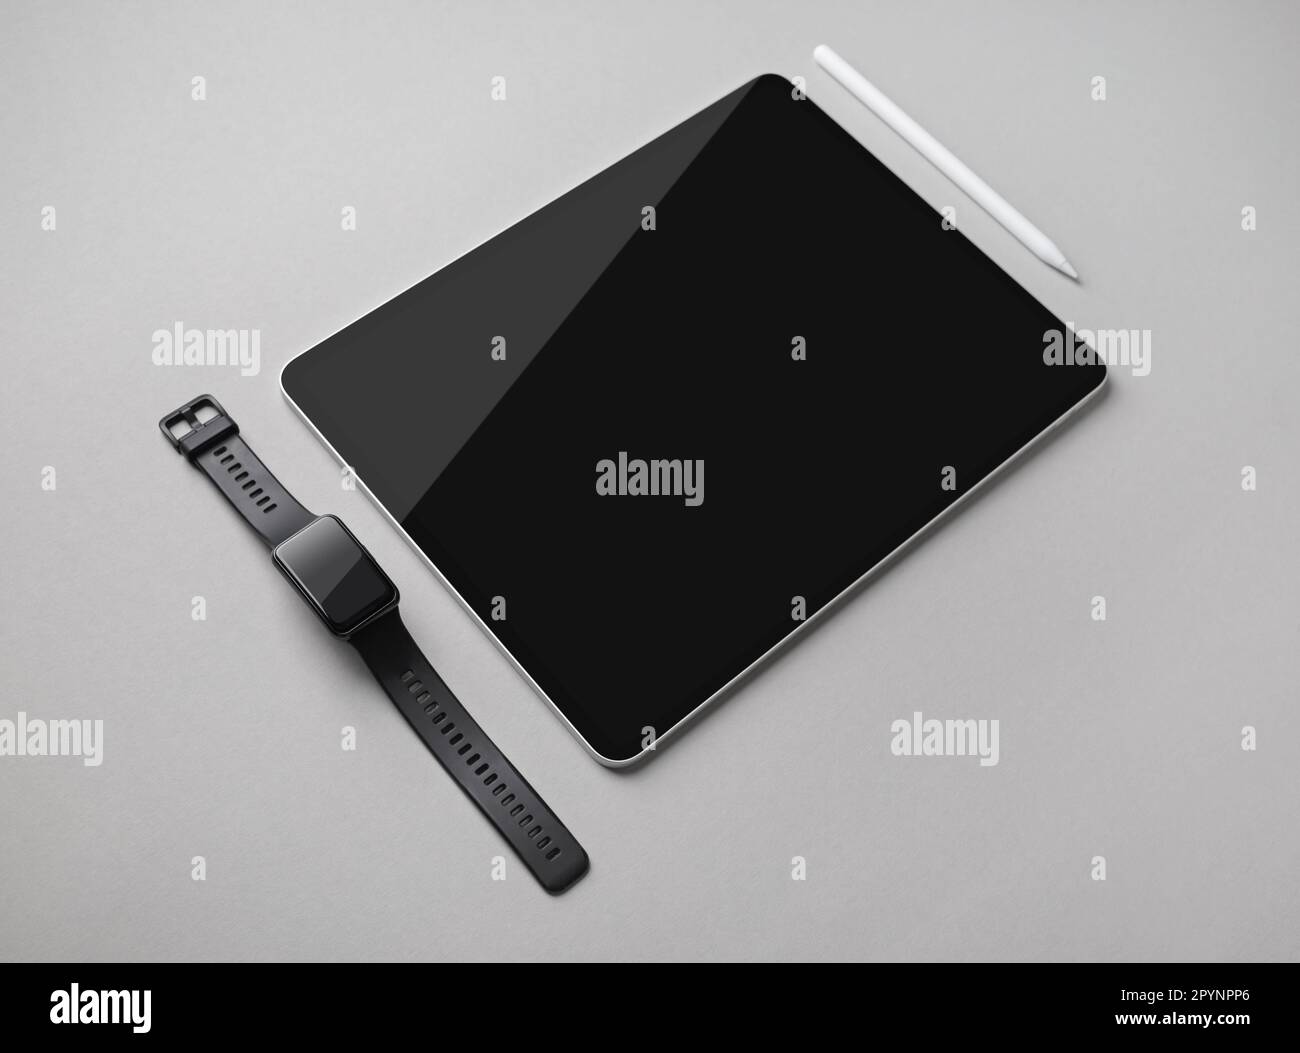 Digital tablet with blank black screen, fitness bracelet and stylus pen on gray paper background. Stock Photo